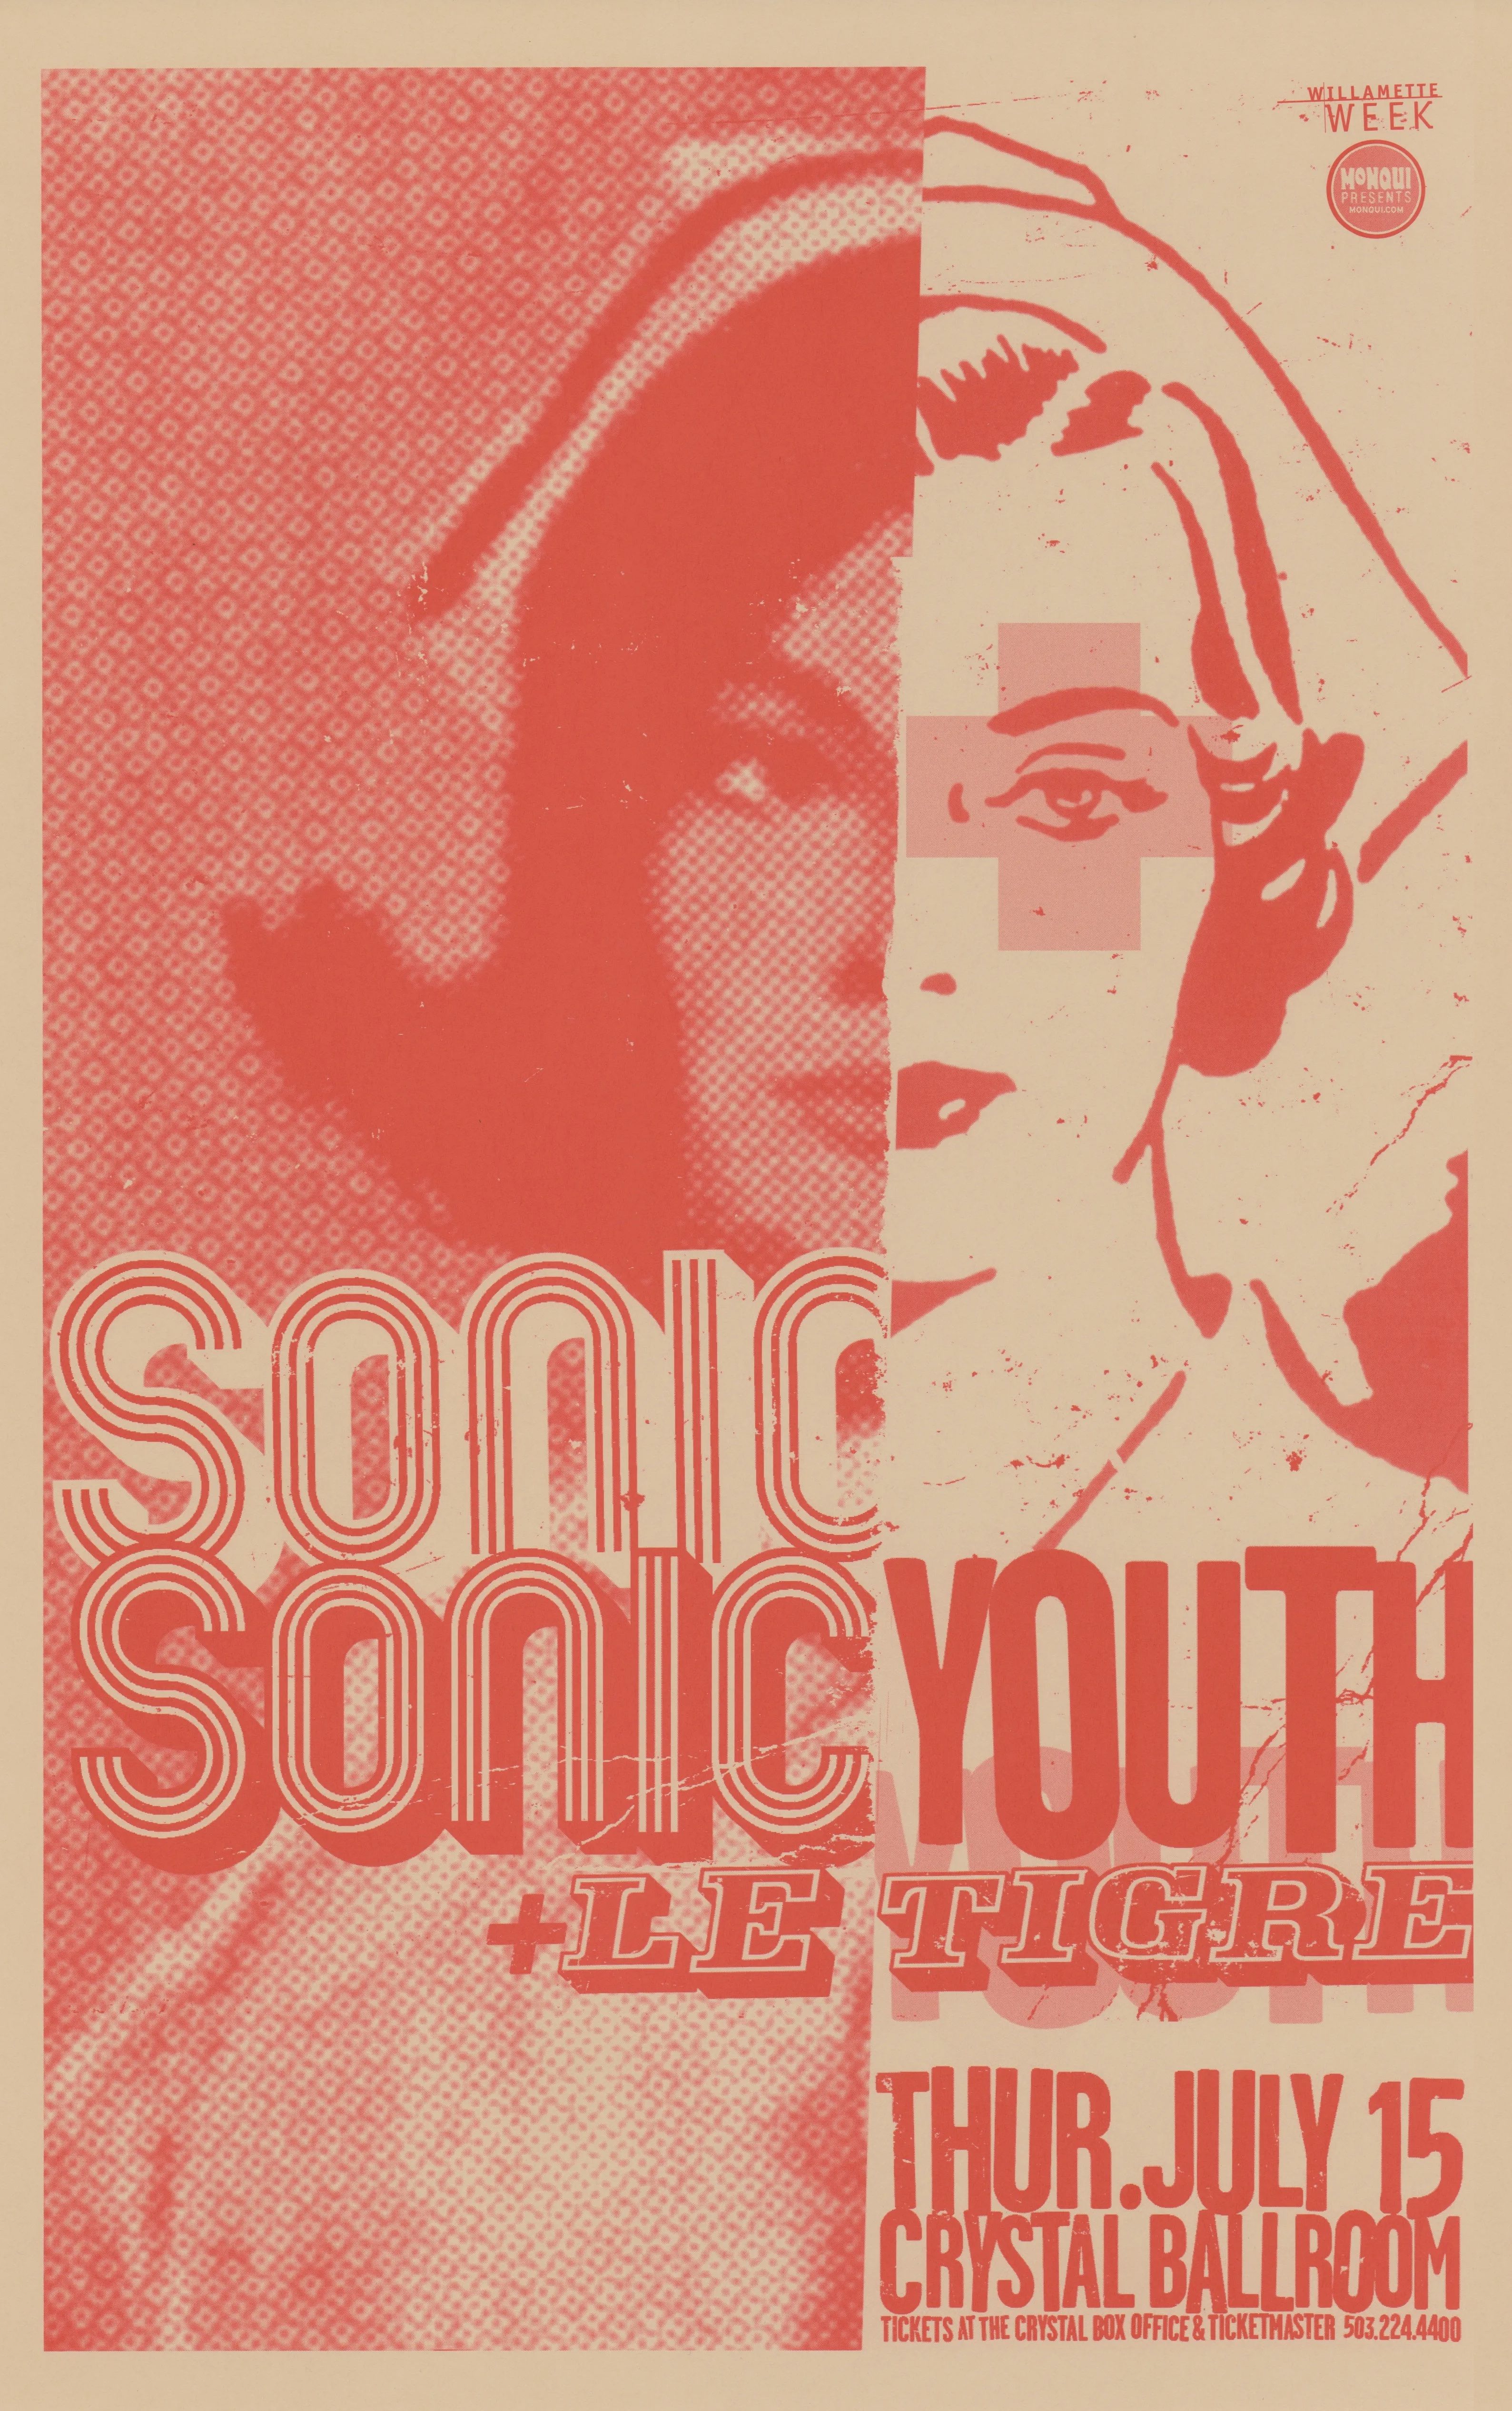 MXP-186.1 Sonic Youth & Le Tigre Crystal Ballroom 2004 Concert Poster